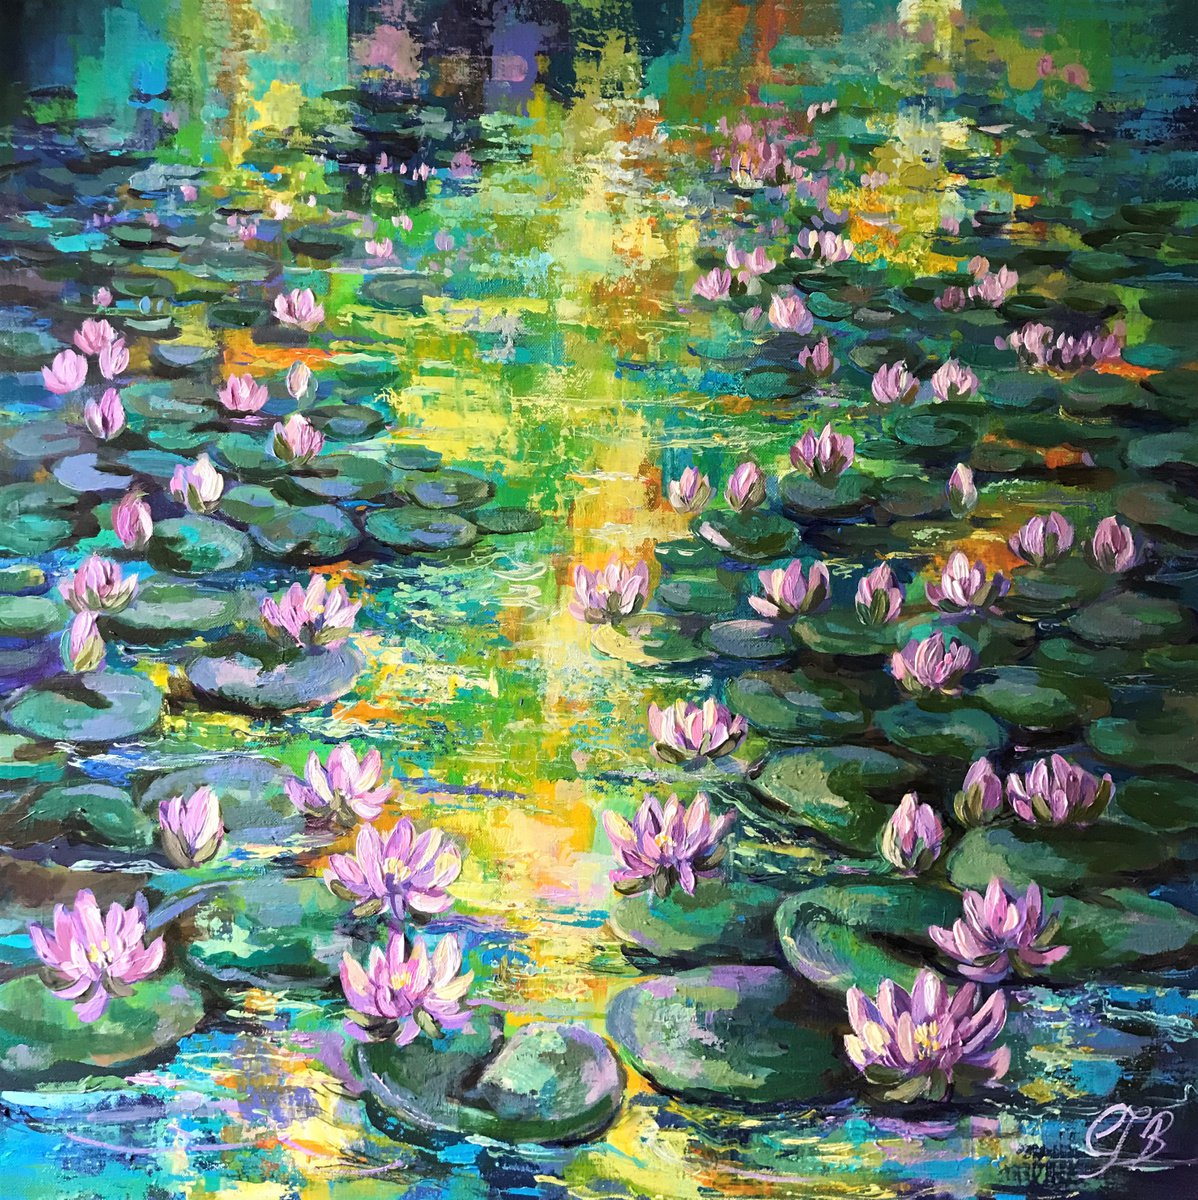 Sunset on Lilly Pond by Colette Baumback